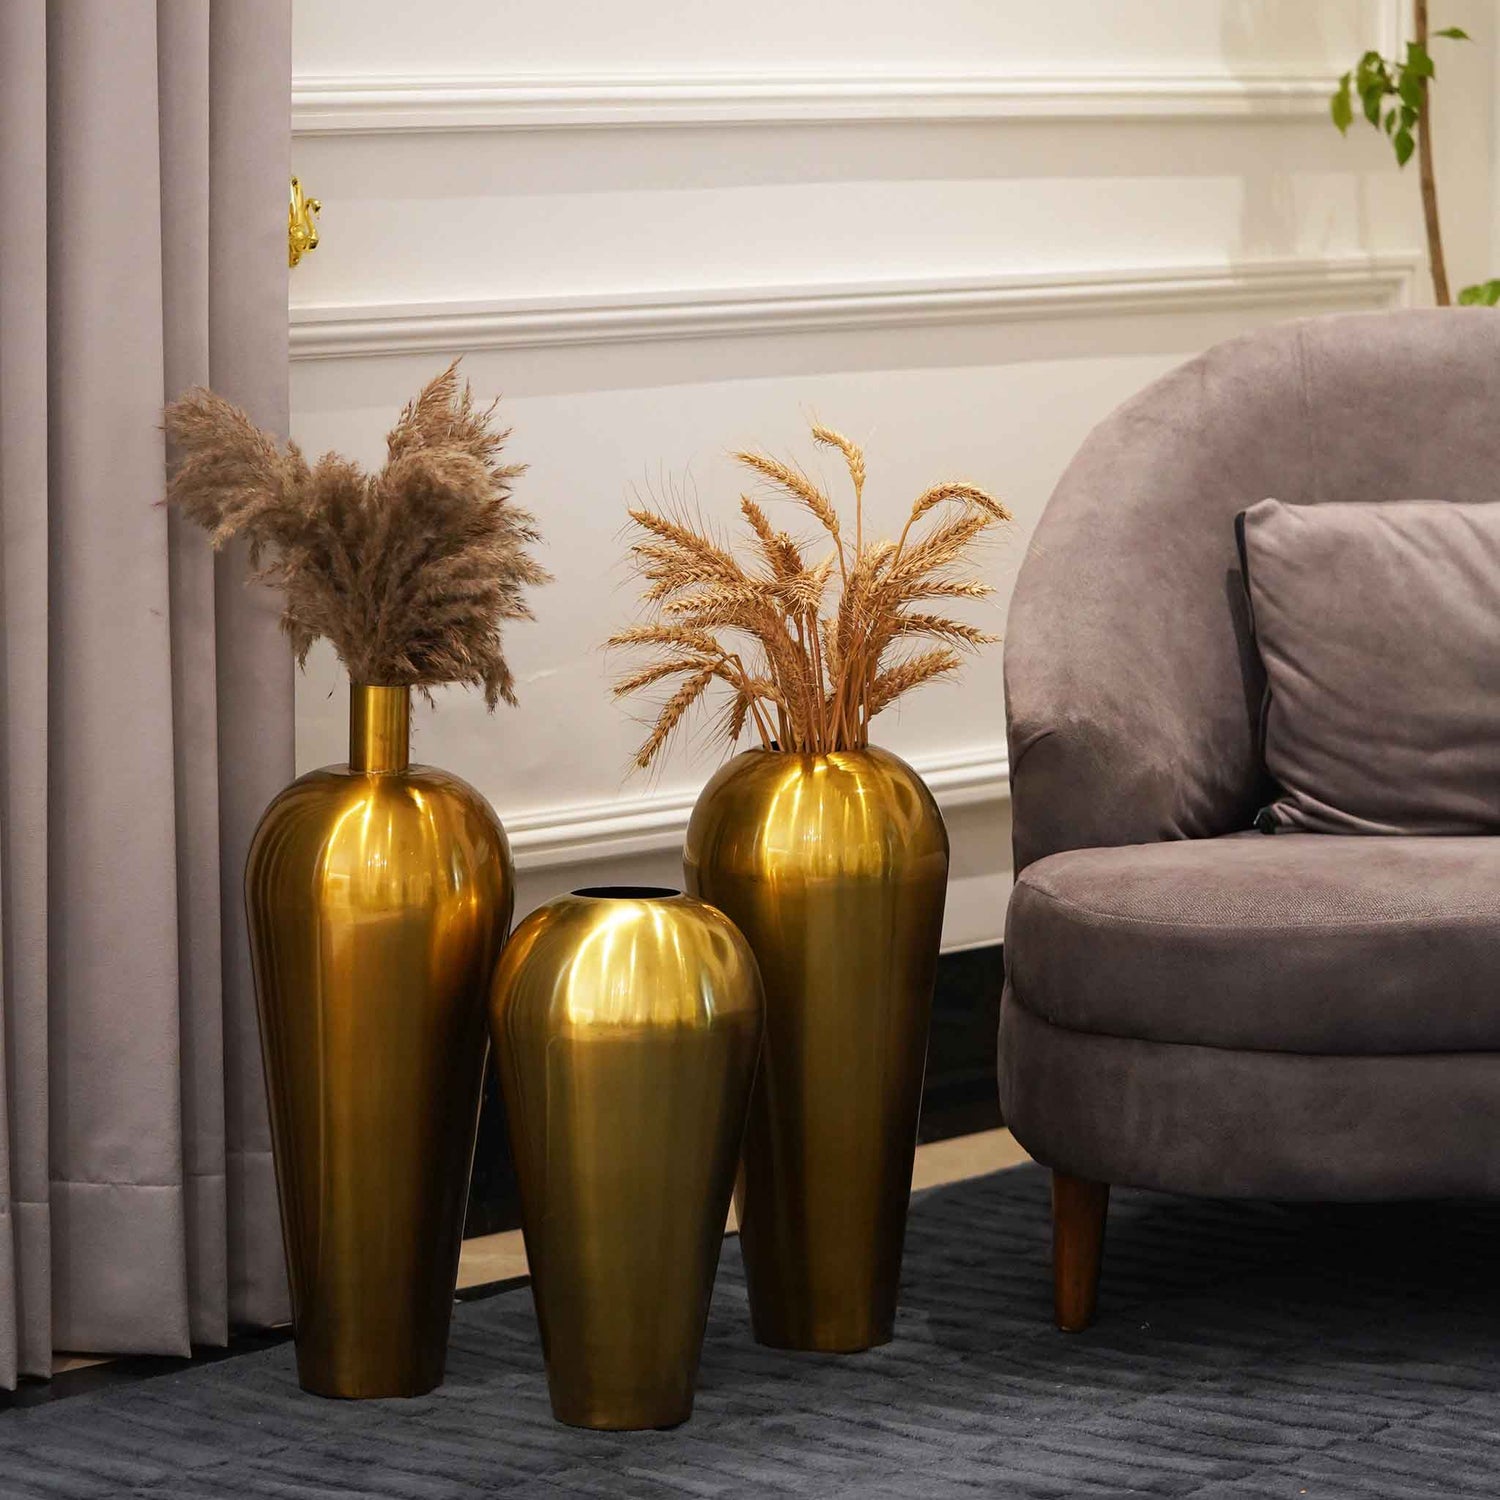 Three tall golden metallic vases placed on the floor of a living room.